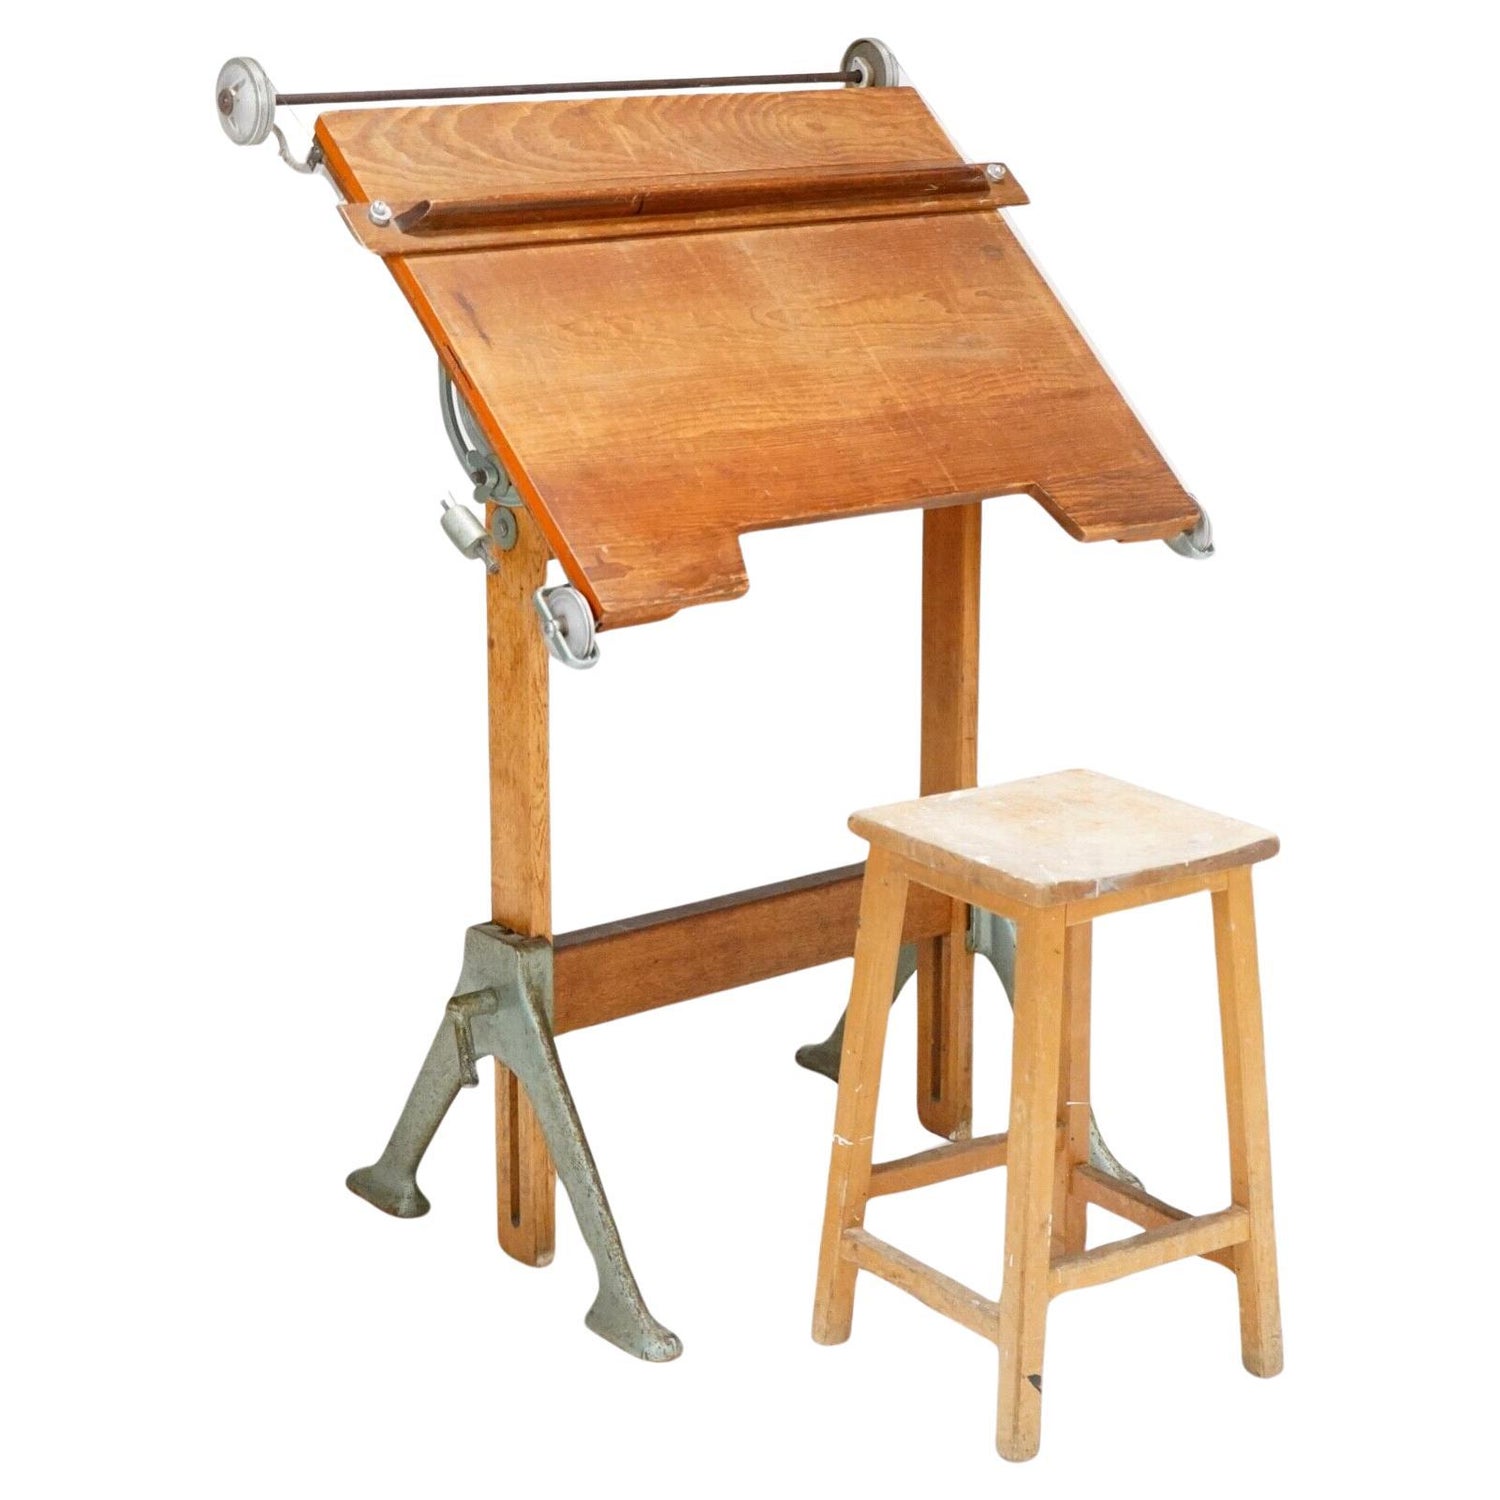 Drafting Table or Architect's Desk, Gates Antiques Ltd.